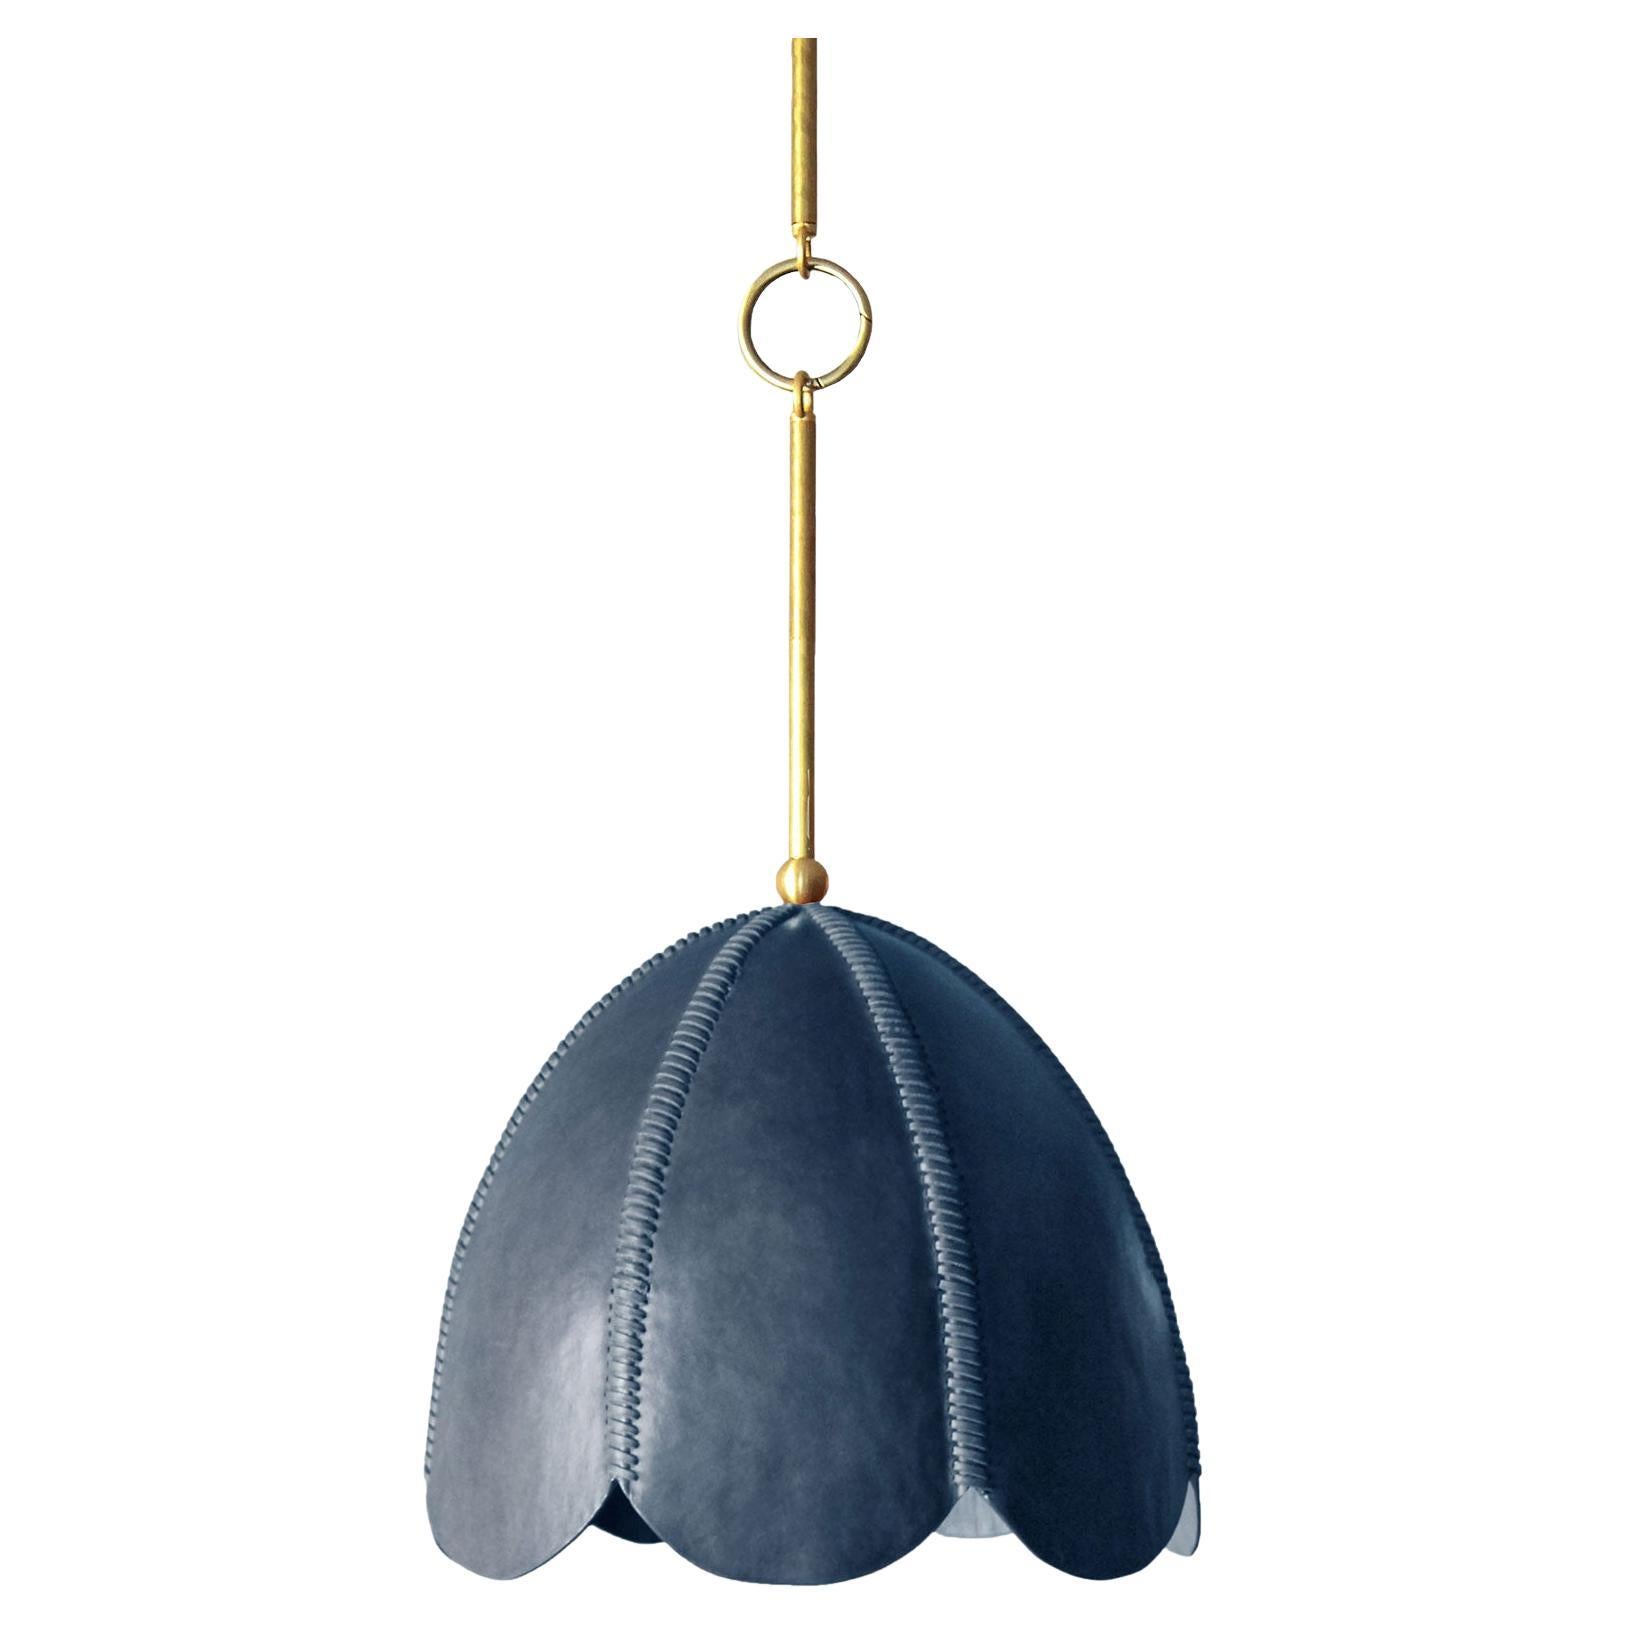 Leather Pendant Light in Cobalt, Doma, Talabartero Collection Saddle Lamp For Sale